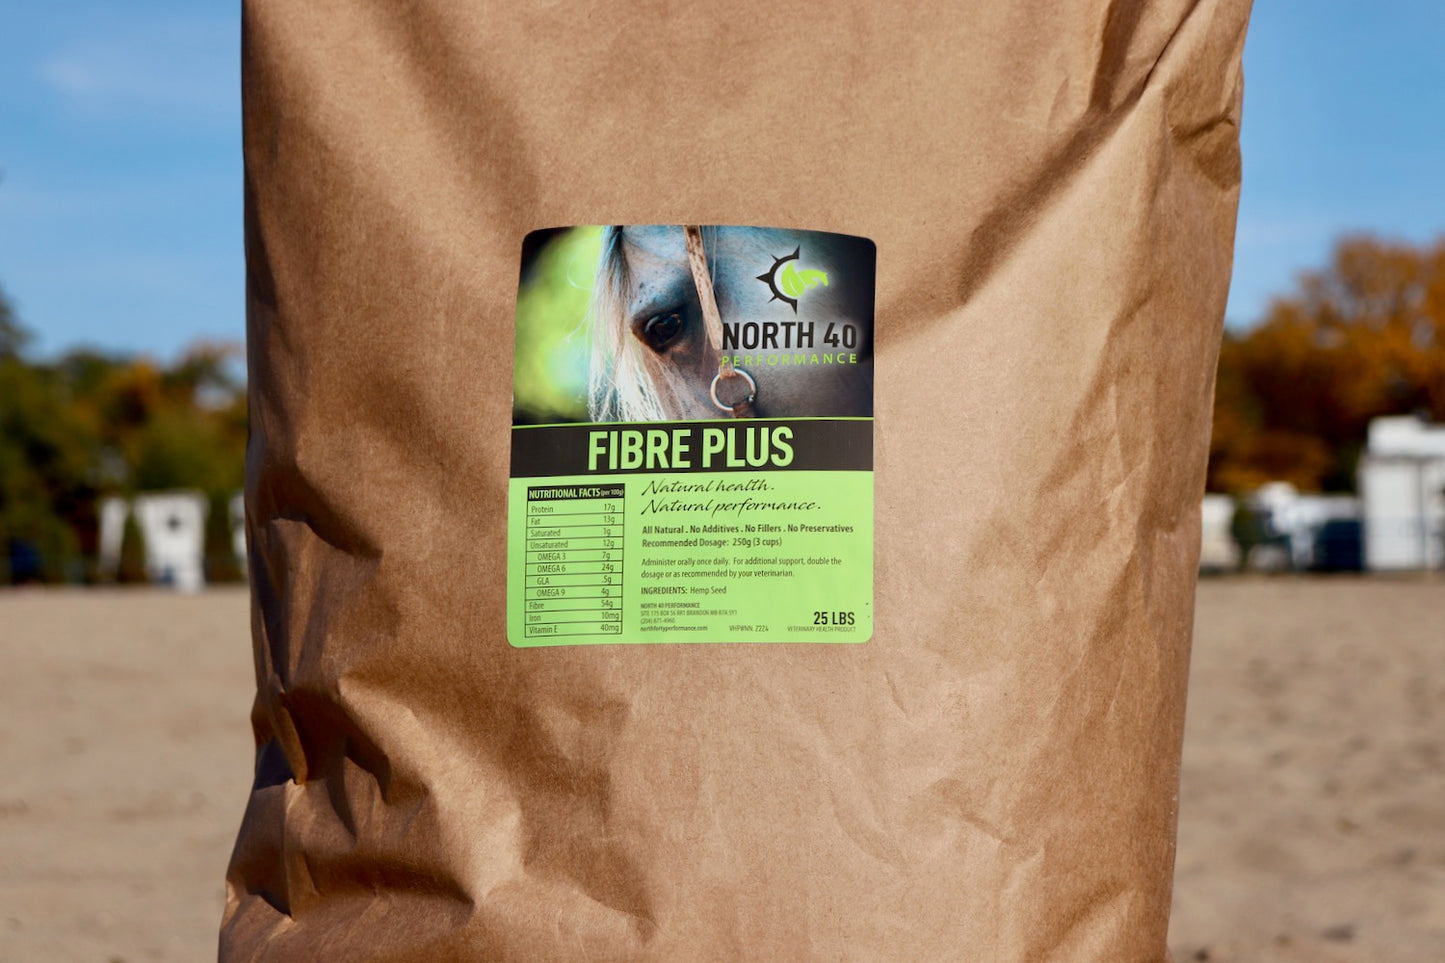 Fibre Plus is a hemp seed product from North 40 Performance